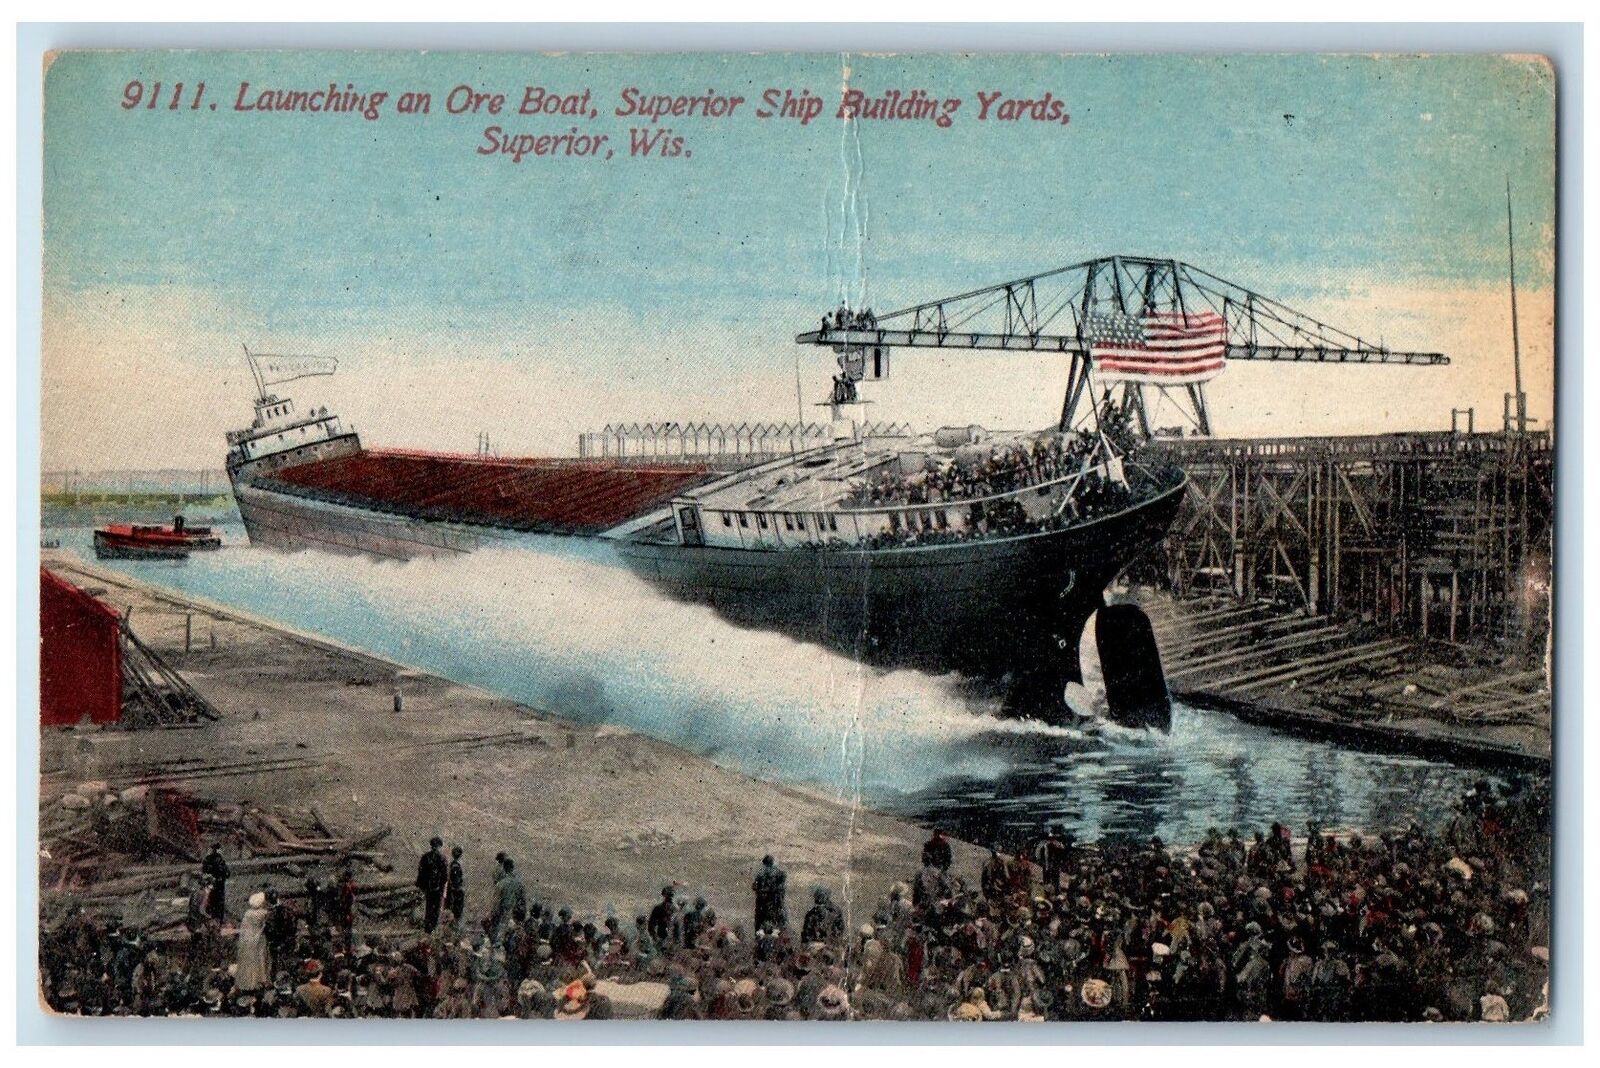 c1950\'s Launching An Ore Boat Superior Ship Building Yards Watchers WI Postcard